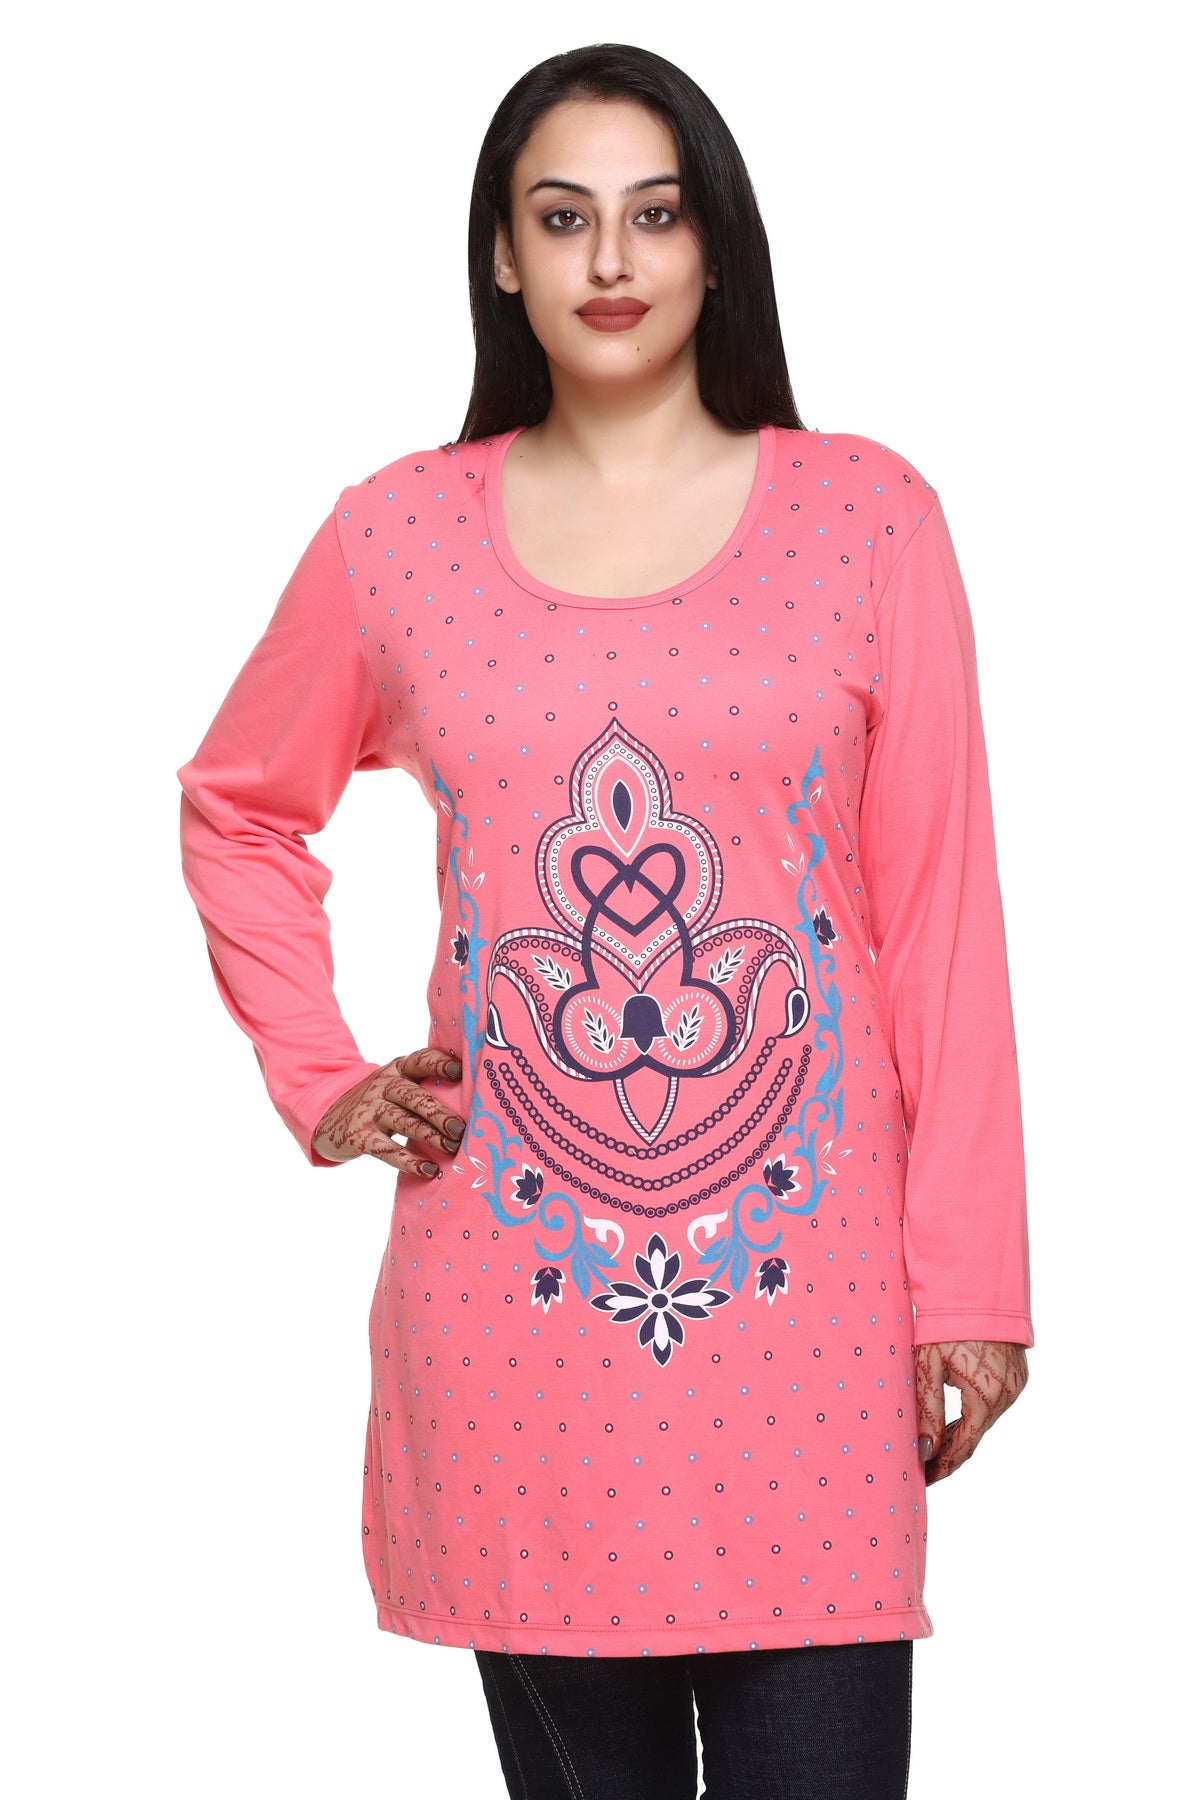 CUPID Women Plus Size Full Sleeves Cotton Long Top For Winter and Semi Winter For Women Combo of Two (Pink/Black) freeshipping - Cupid Clothings